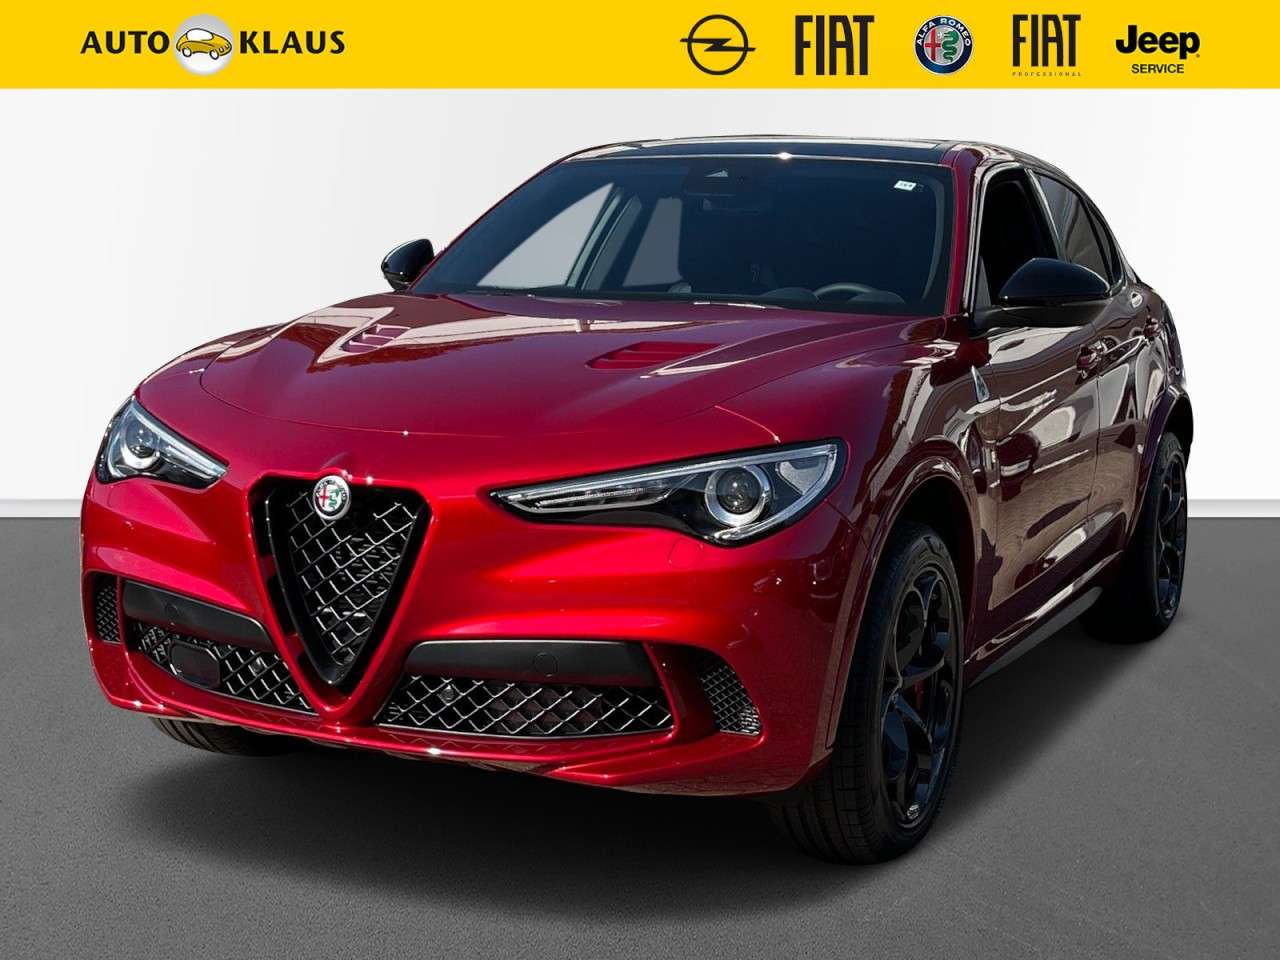 Alfa Romeo Stelvio Off-Road/Pick-up in Red new in Zell / Mosel for € 99,880.-